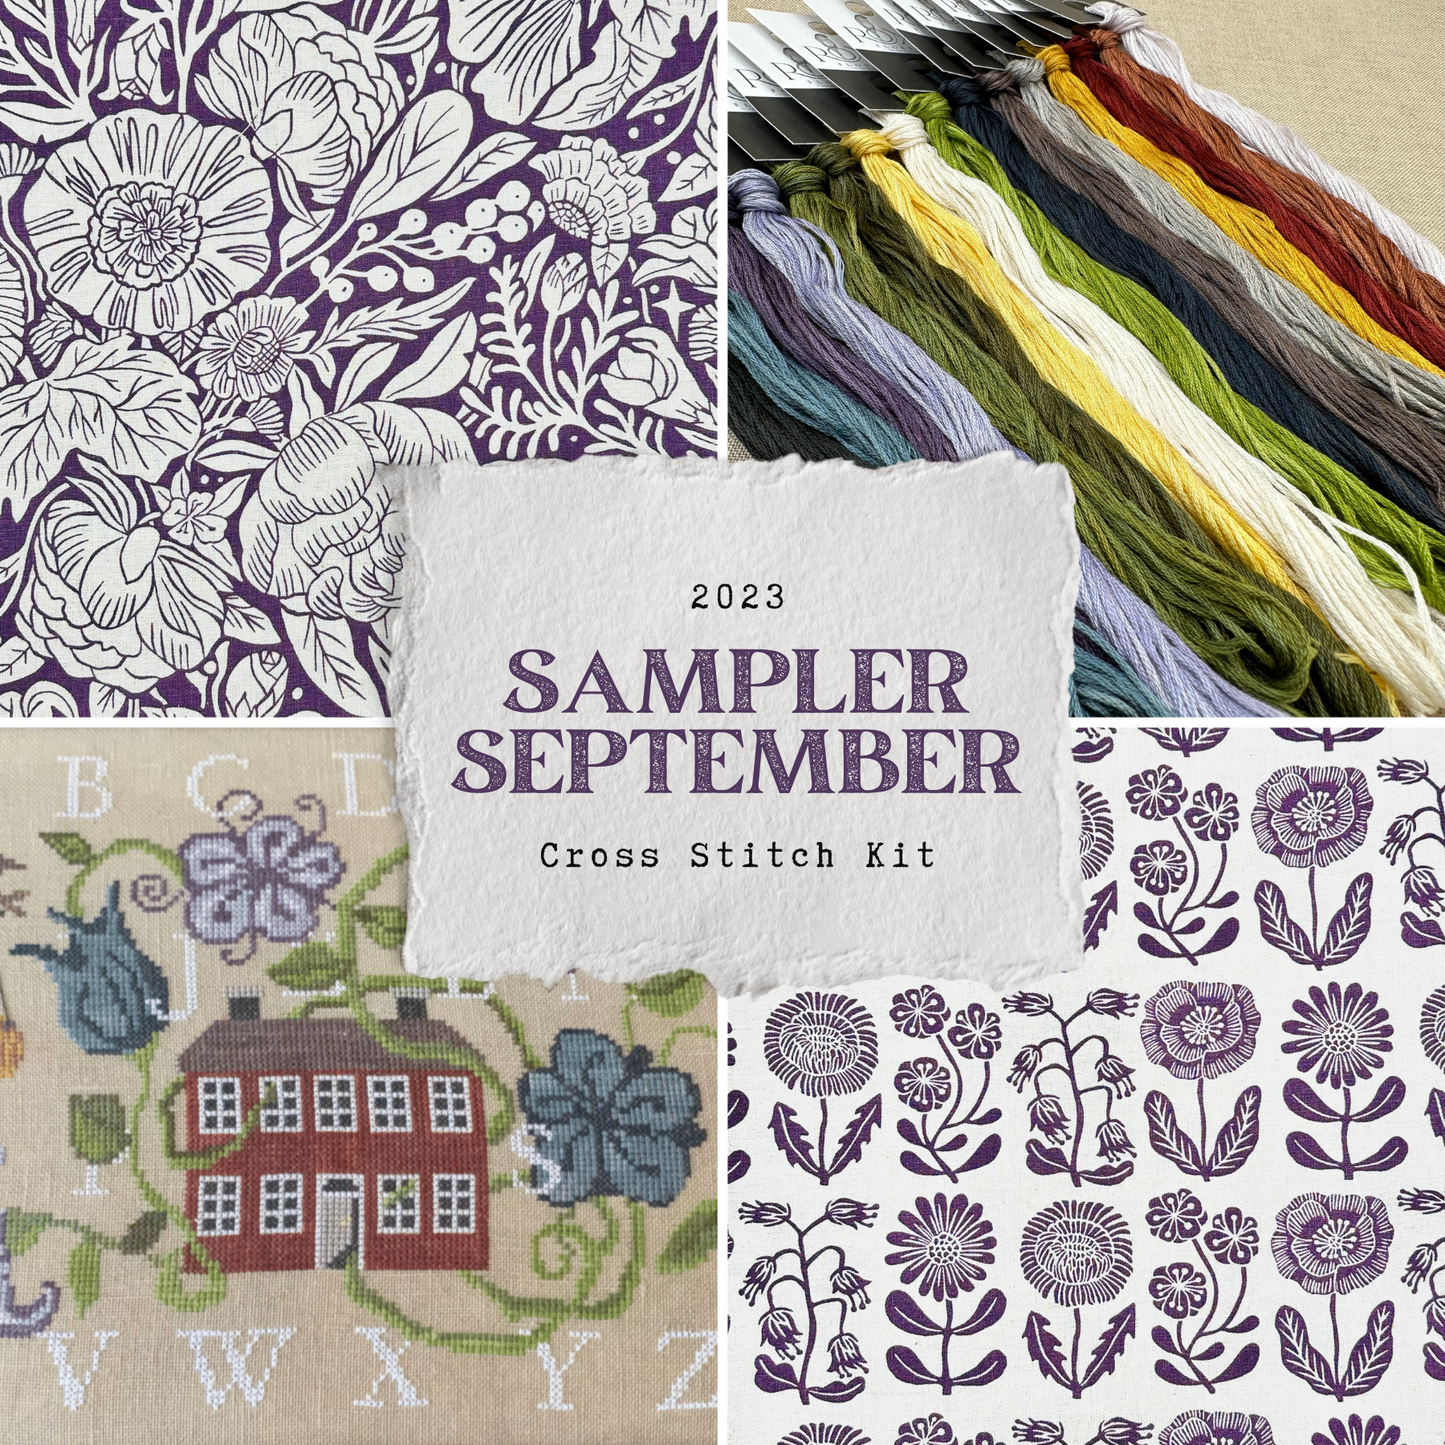 Maximum Cross Stitch, Evertote, Roxy Floss Co, and Timber Yarns - Sampler September 2023 Cross Stitch Kit with Purple Project Bag Set